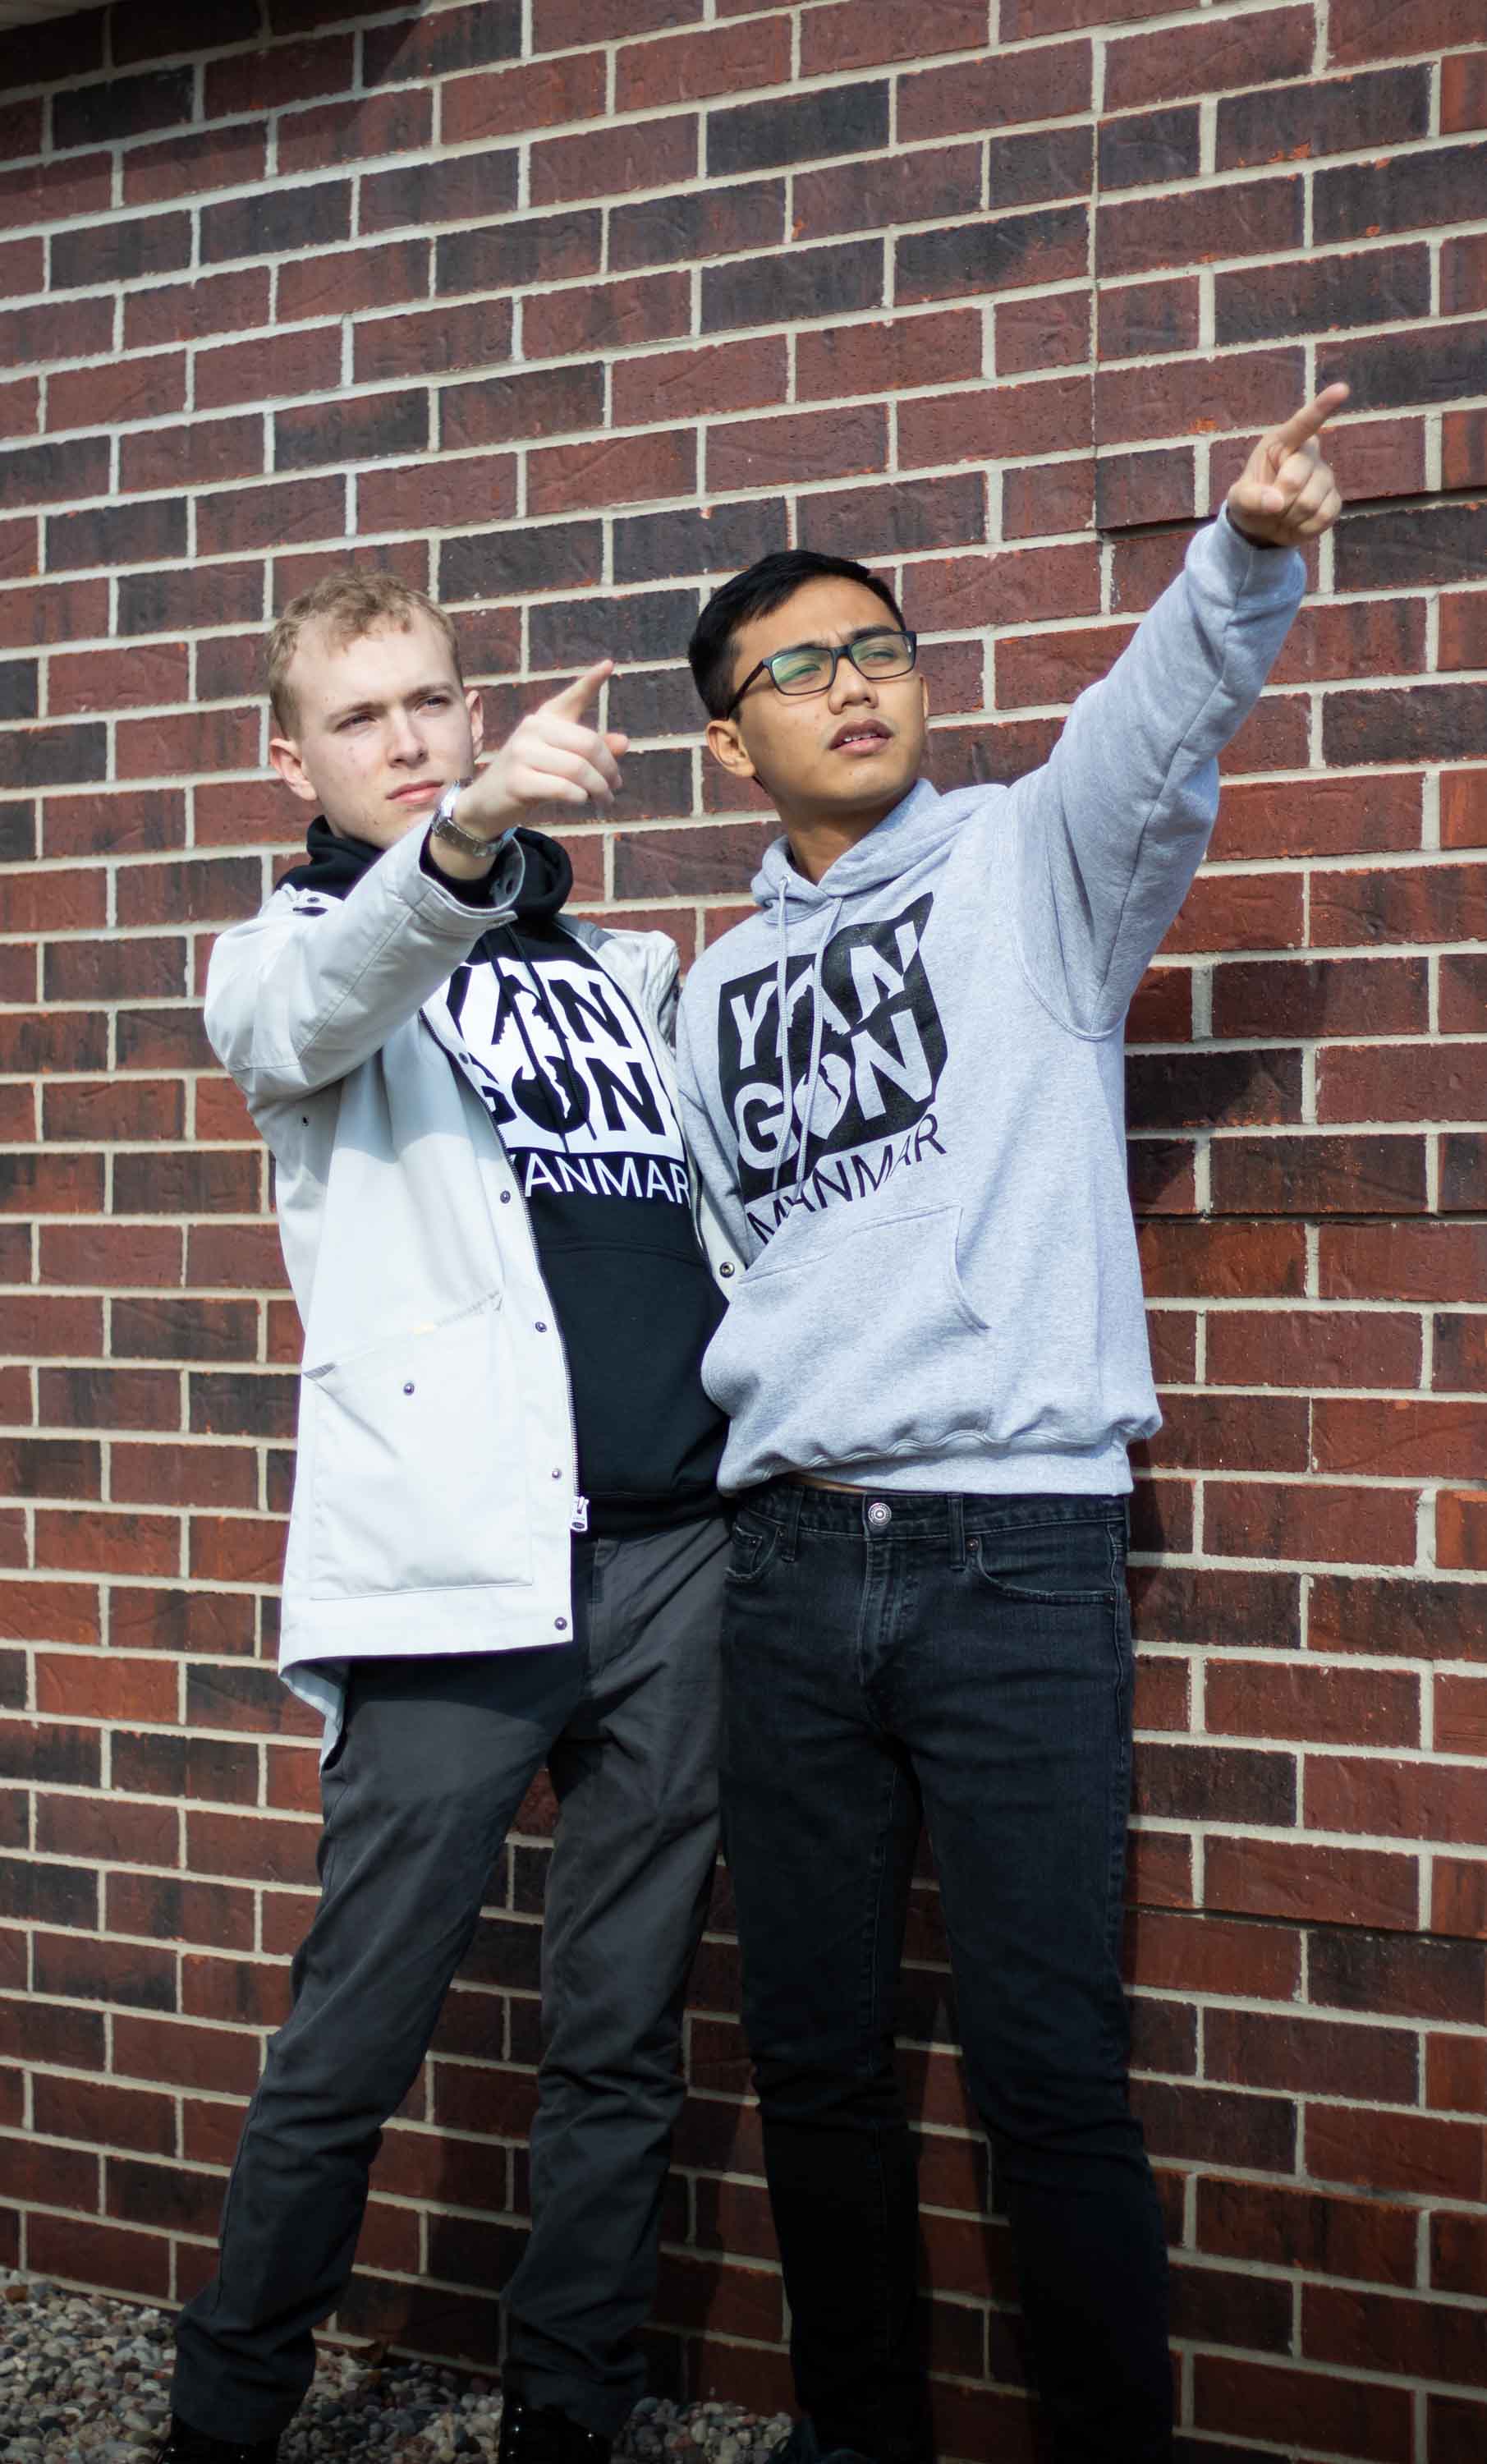 Two men pointing right in front of the bricks